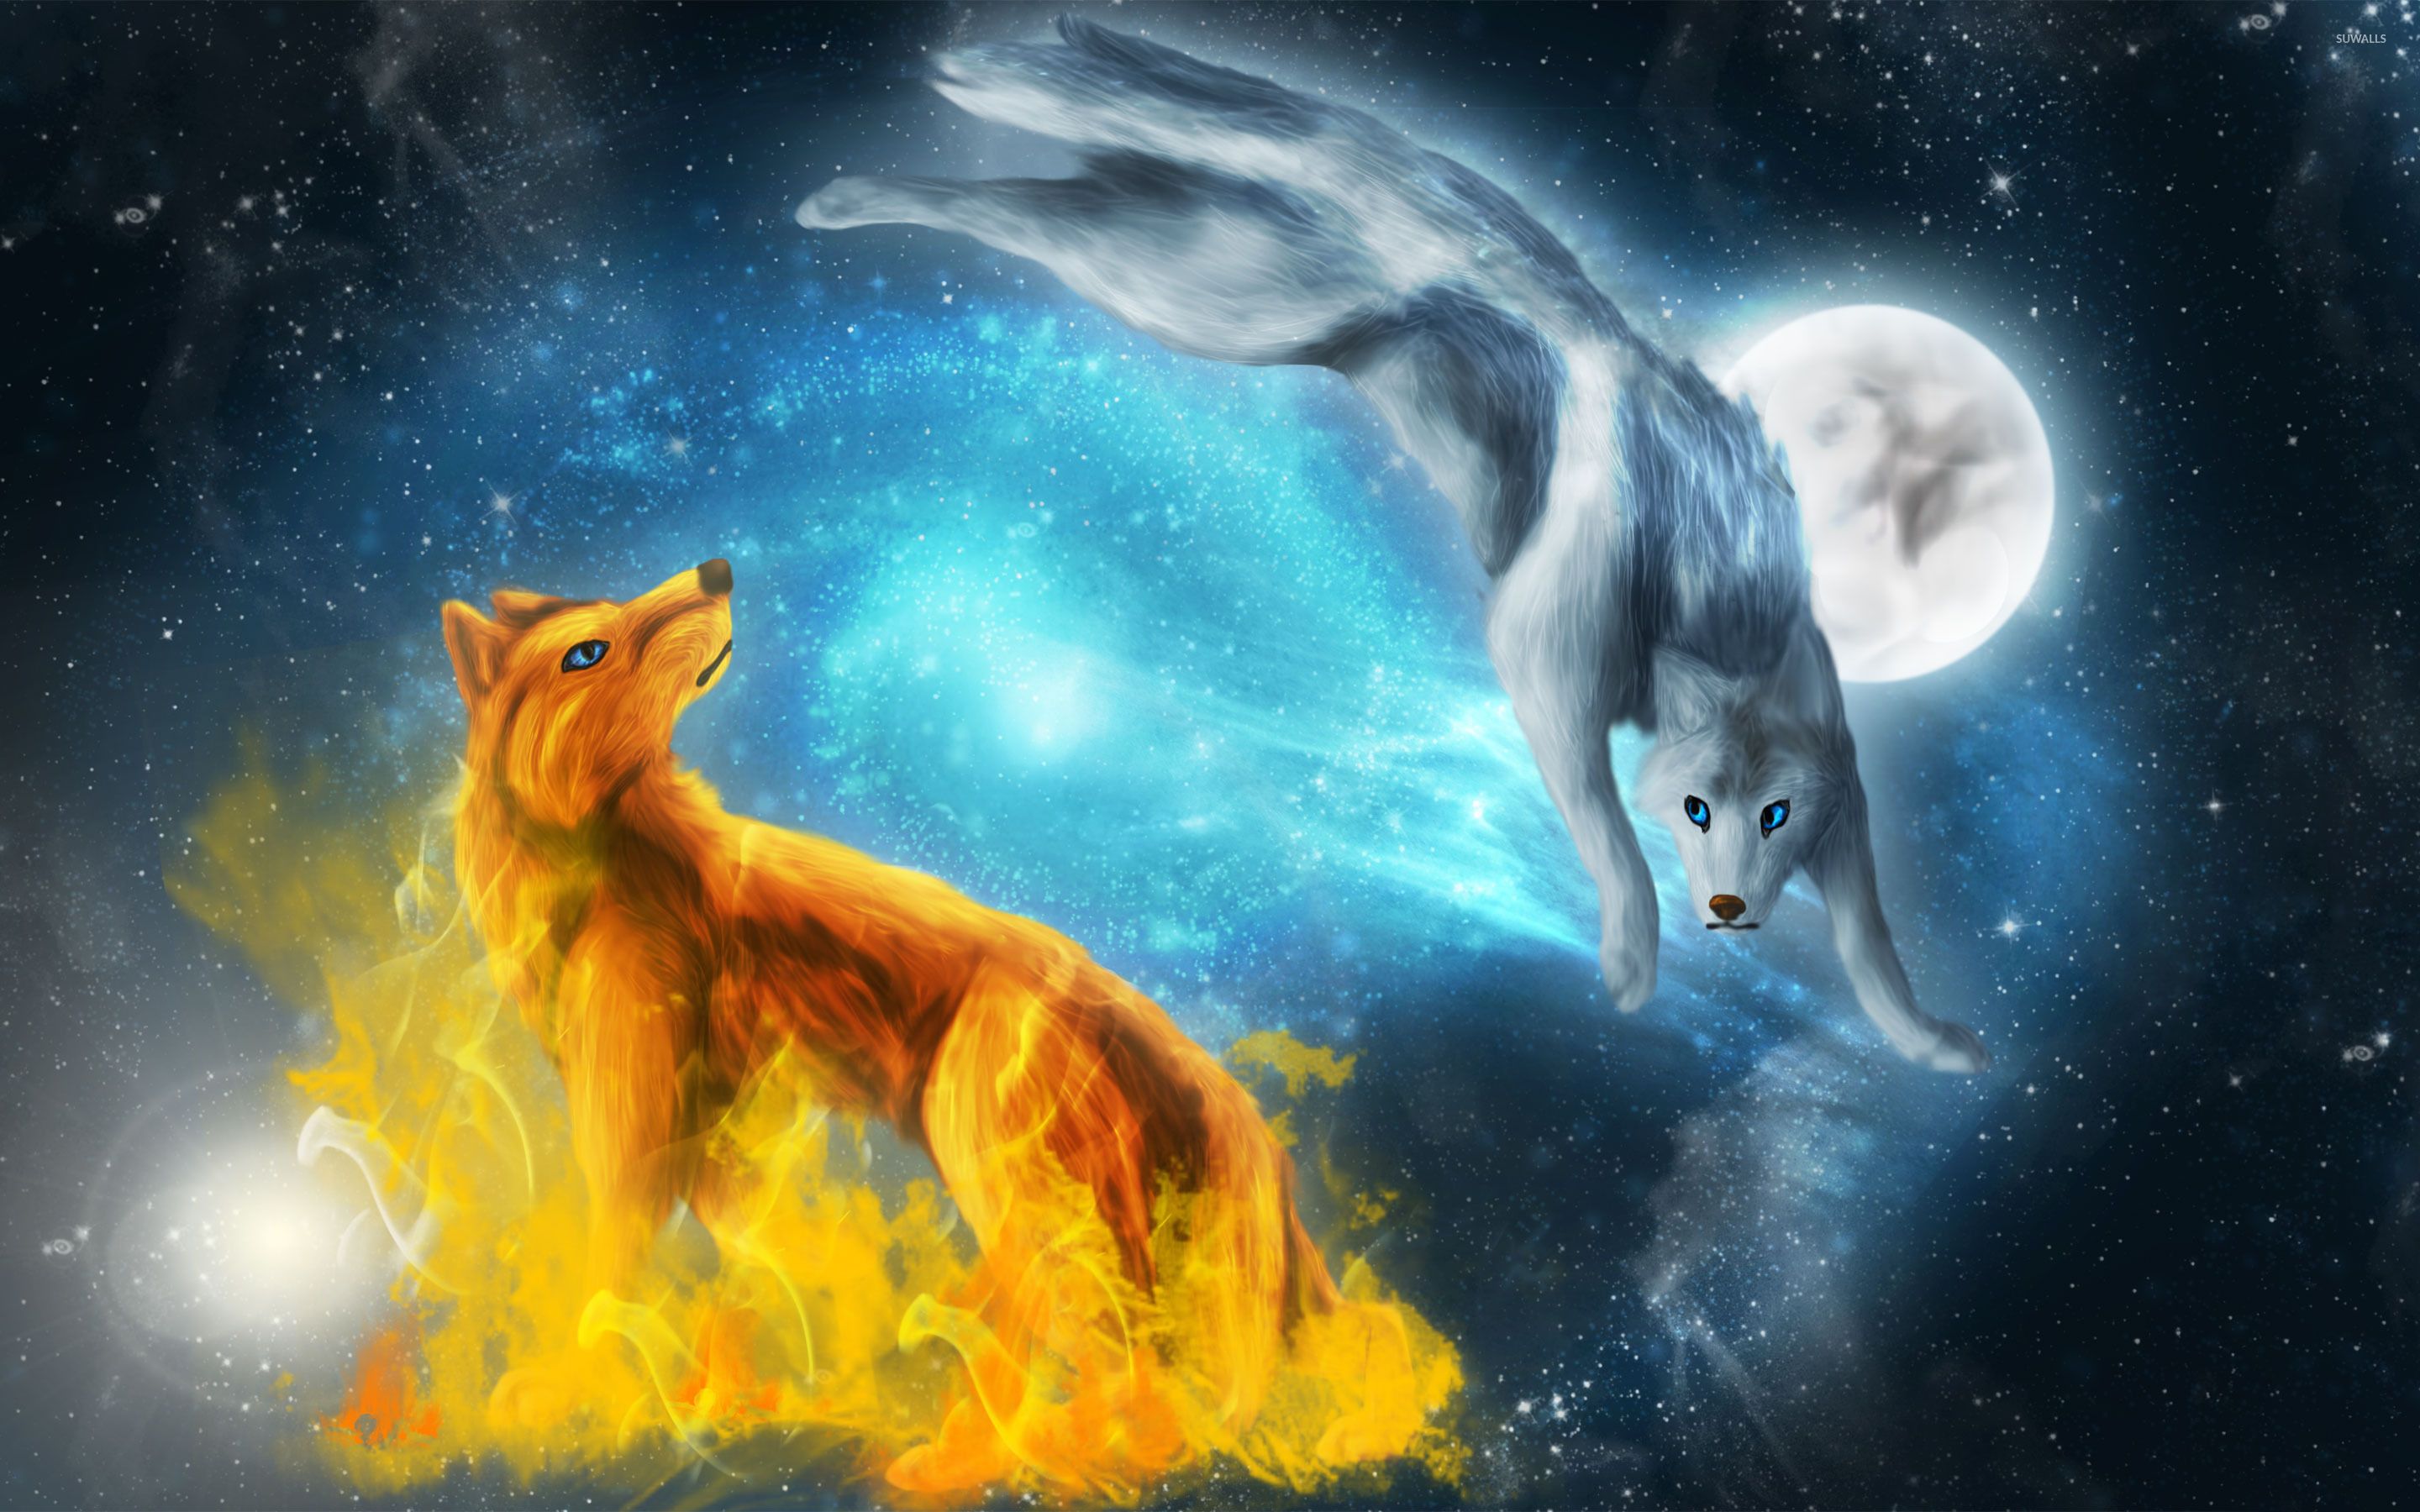 Free download Fire and ice wolves wallpaper Fantasy wallpaper